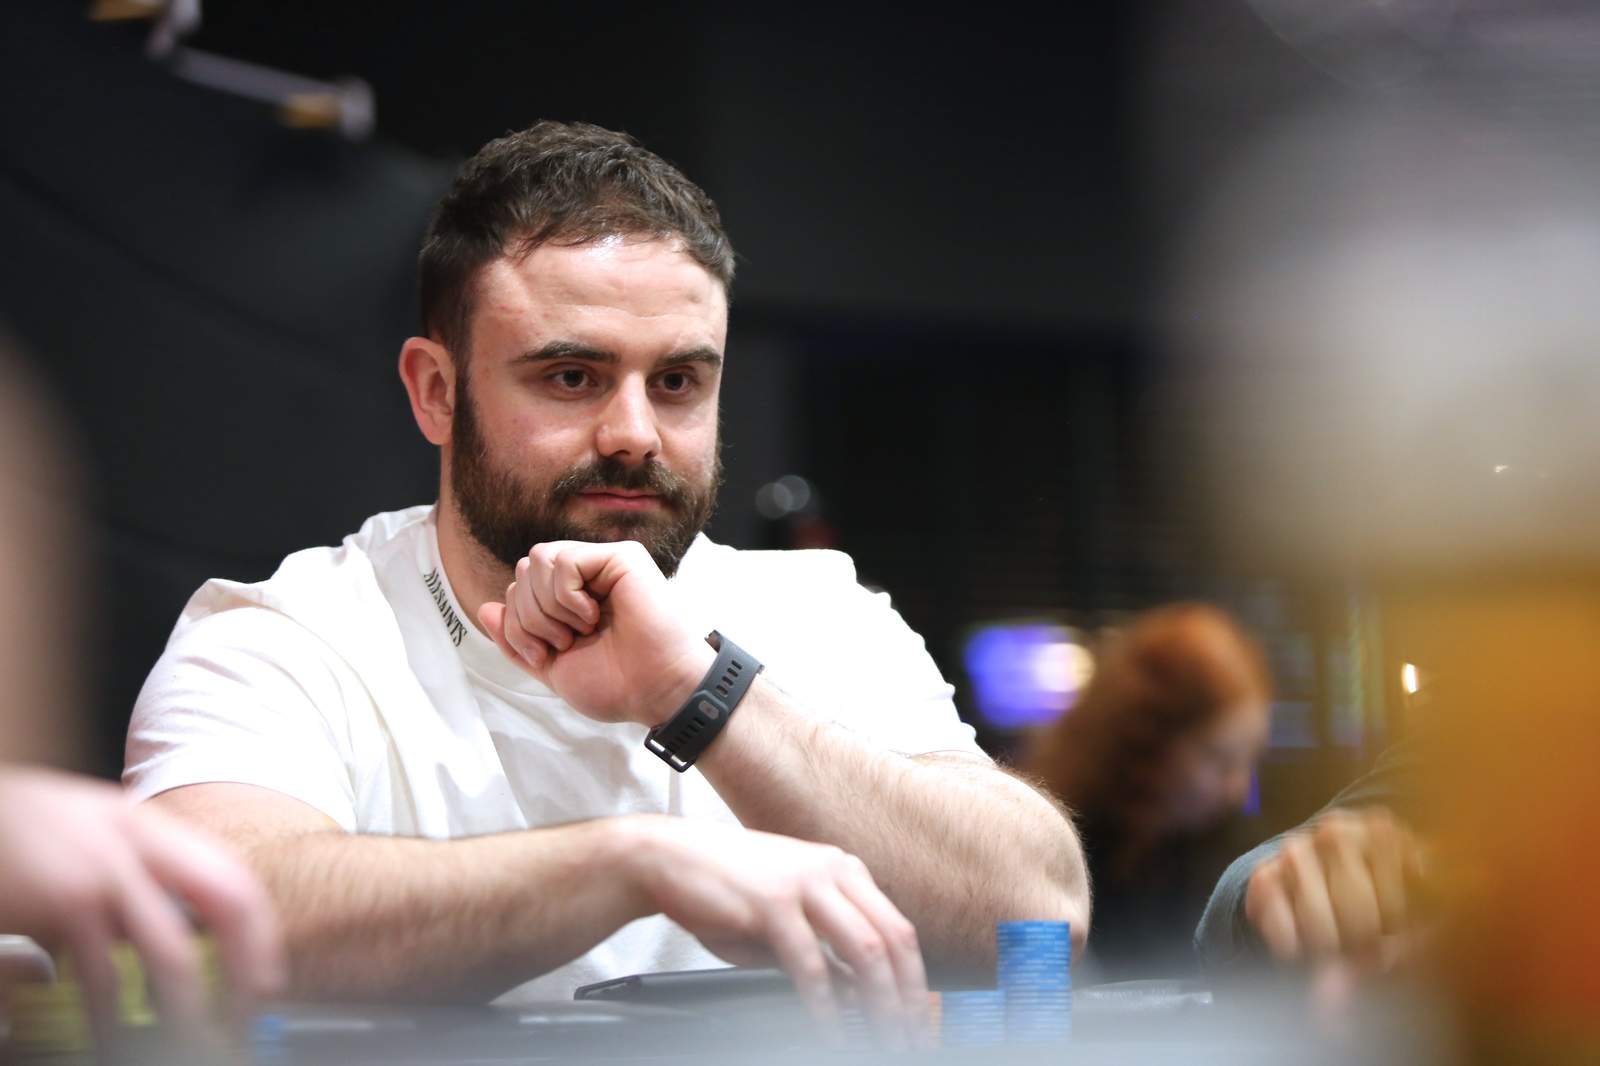 Luke Reeves Leads After Day 1 of partypoker Super High Roller - Bicknell & Foxen in Contention